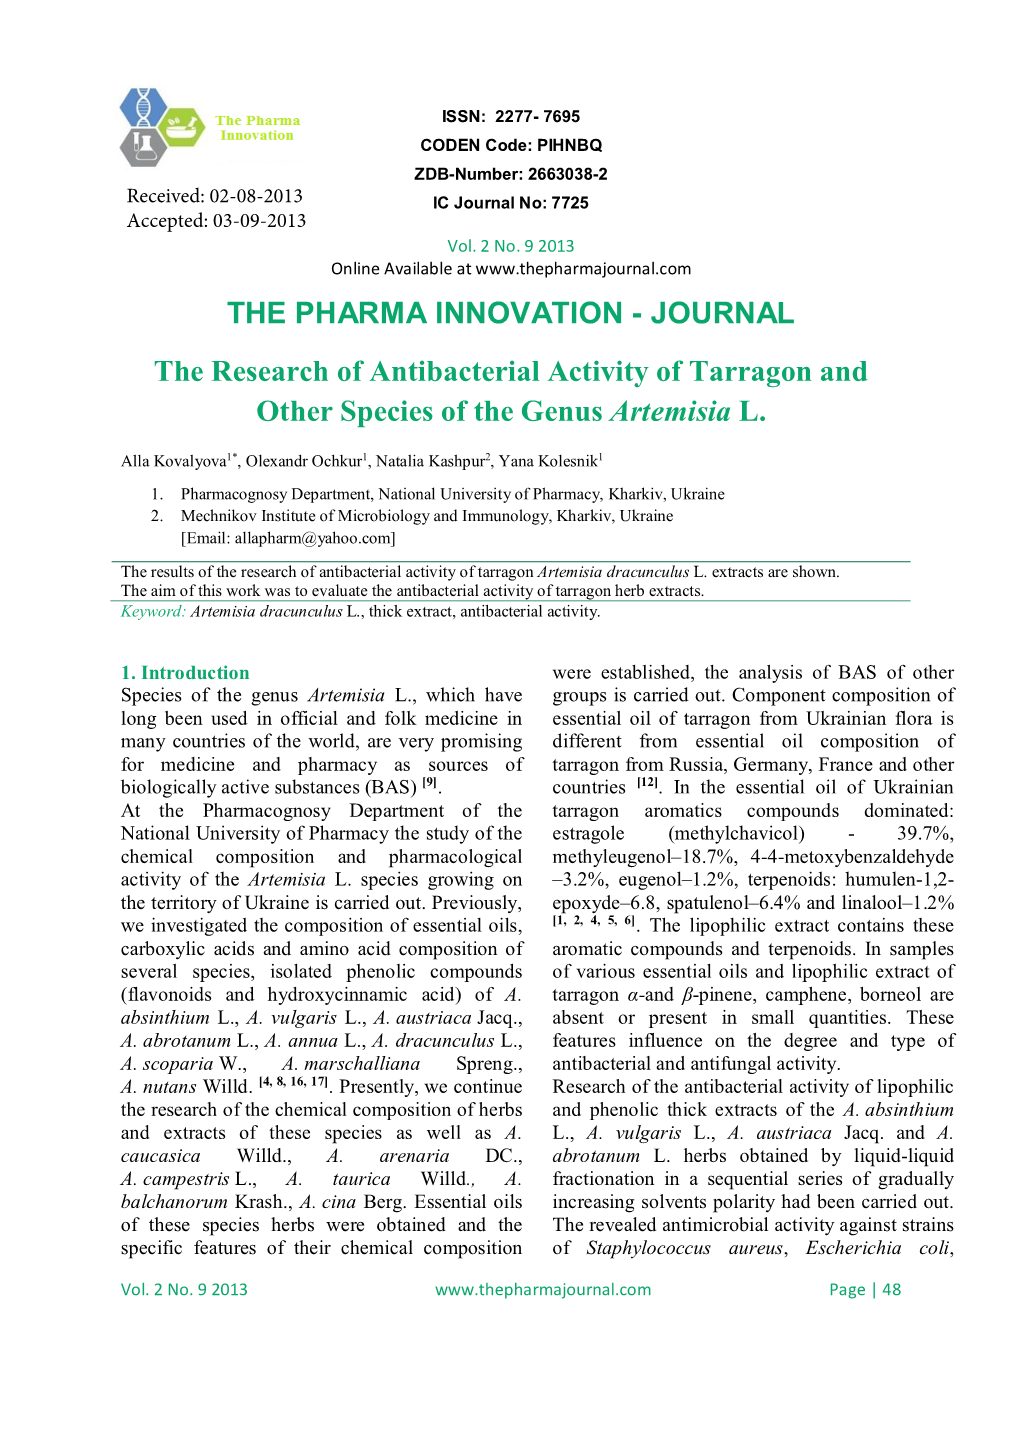 JOURNAL the Research of Antibacterial Activity of Tarragon and Other Species of the Genus Artemisia L